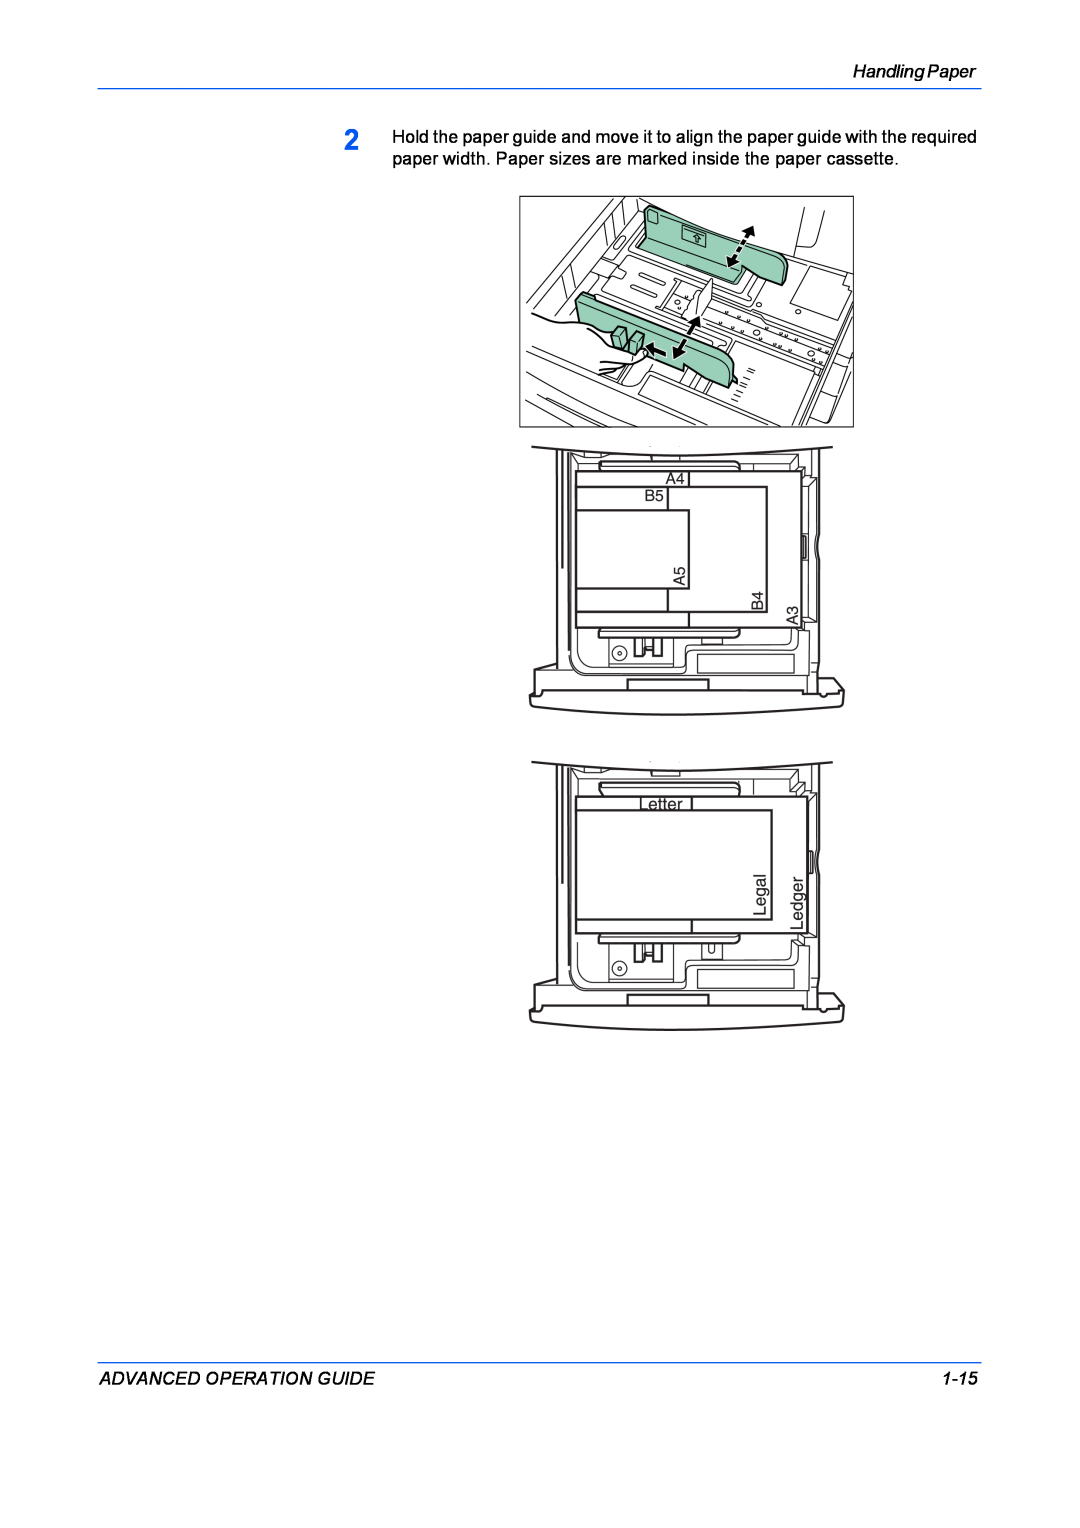 Kyocera 9530DN Handling Paper, paper width. Paper sizes are marked inside the paper cassette, Advanced Operation Guide 